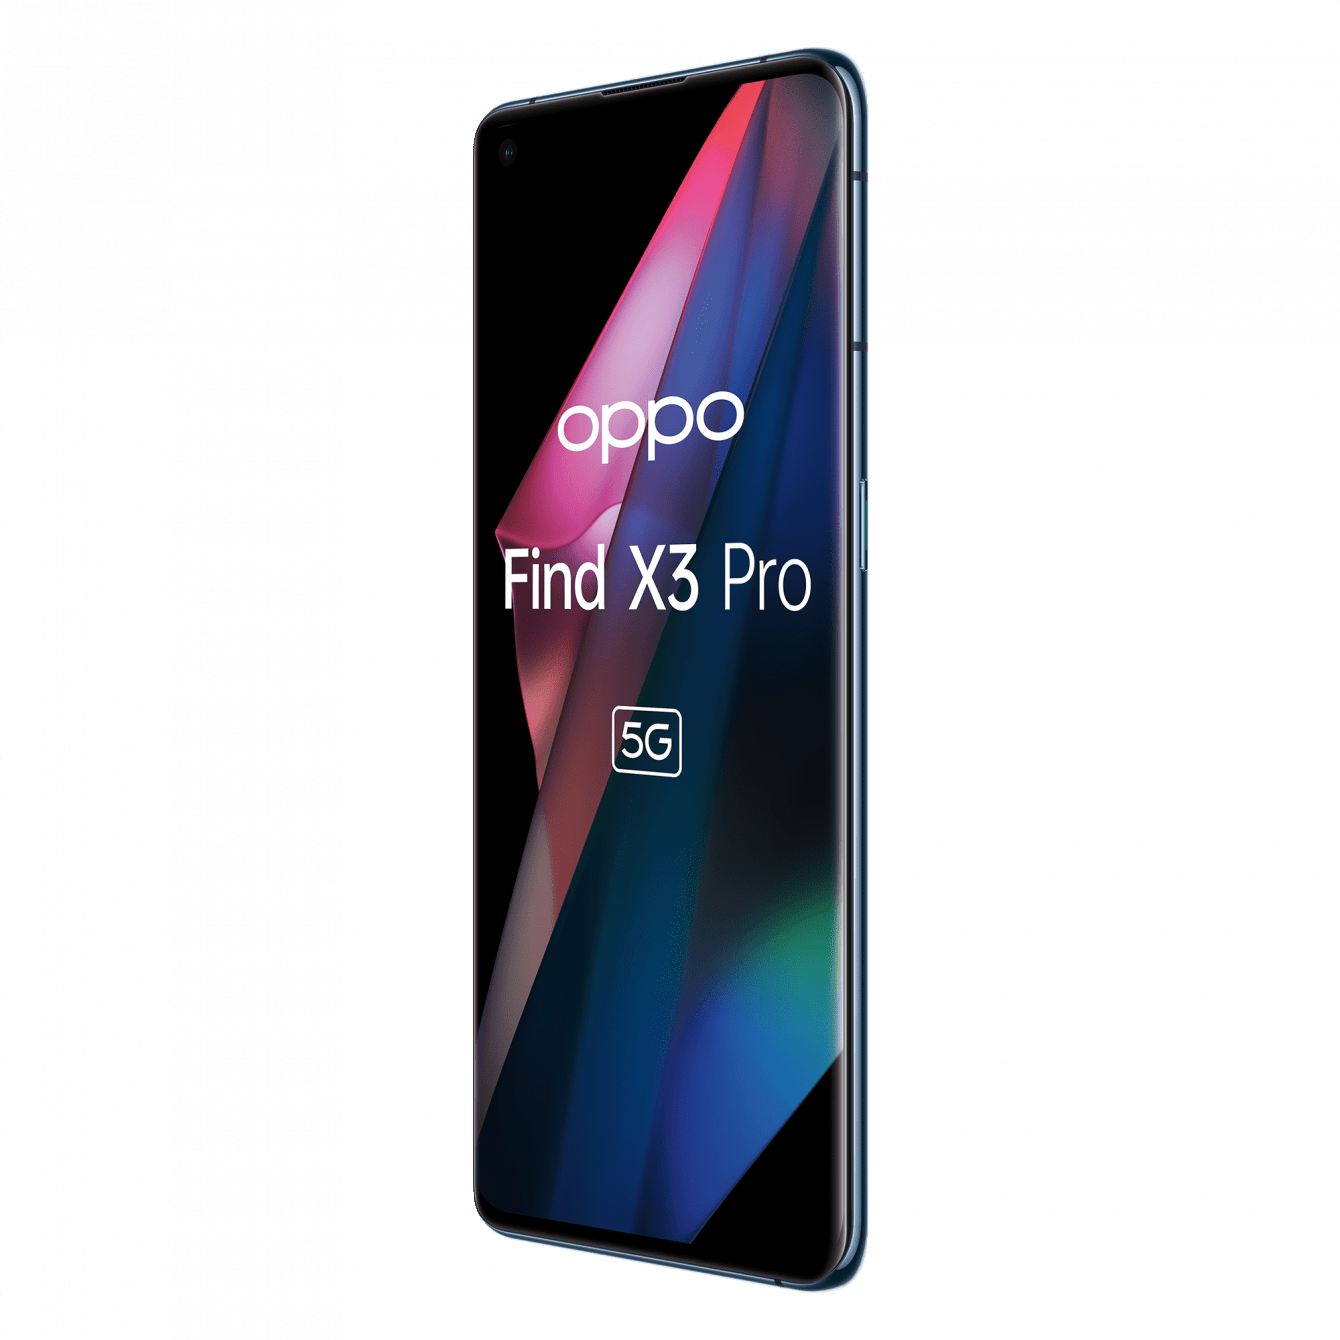 Prime Day 2021 Oppo: here are the offers of the moment